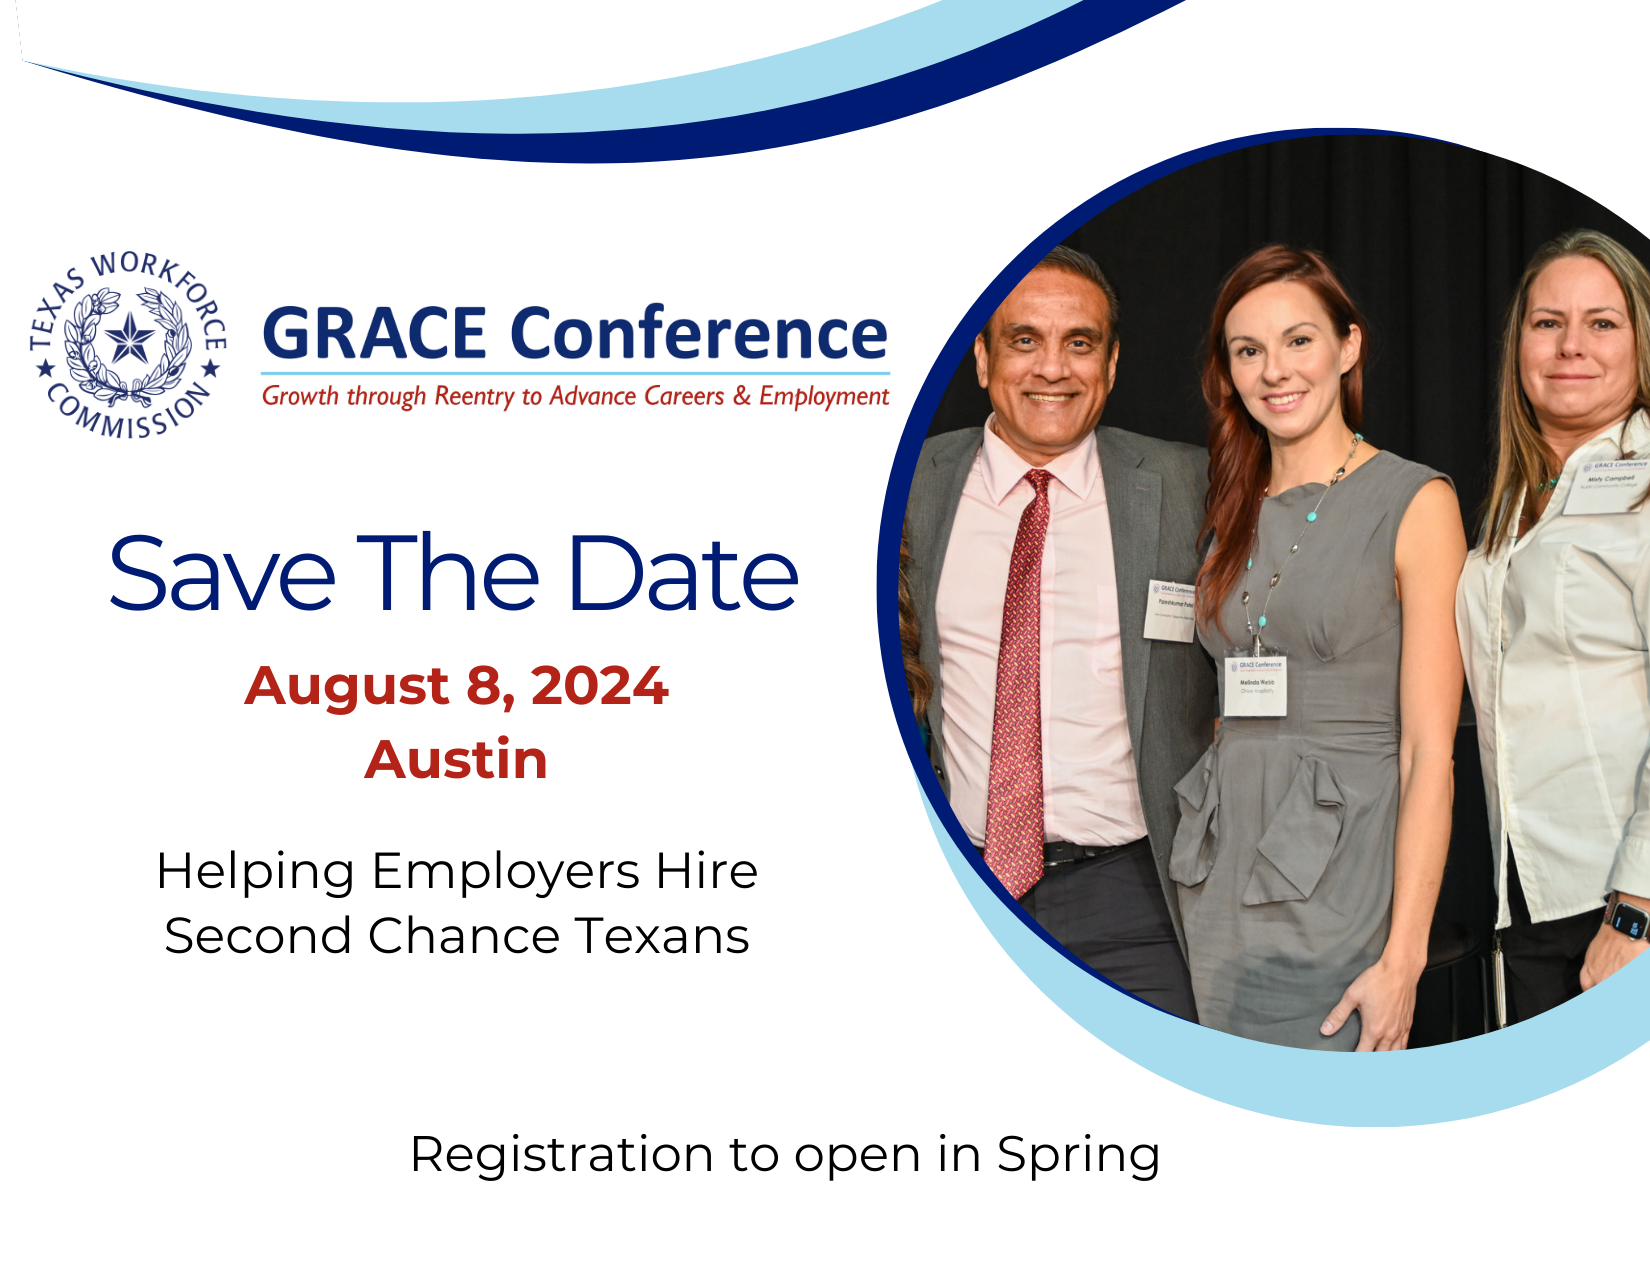 GRACE Conference Save the Date. August 8, 2024 Austin. Helping Employers Hire Second Chance Texans